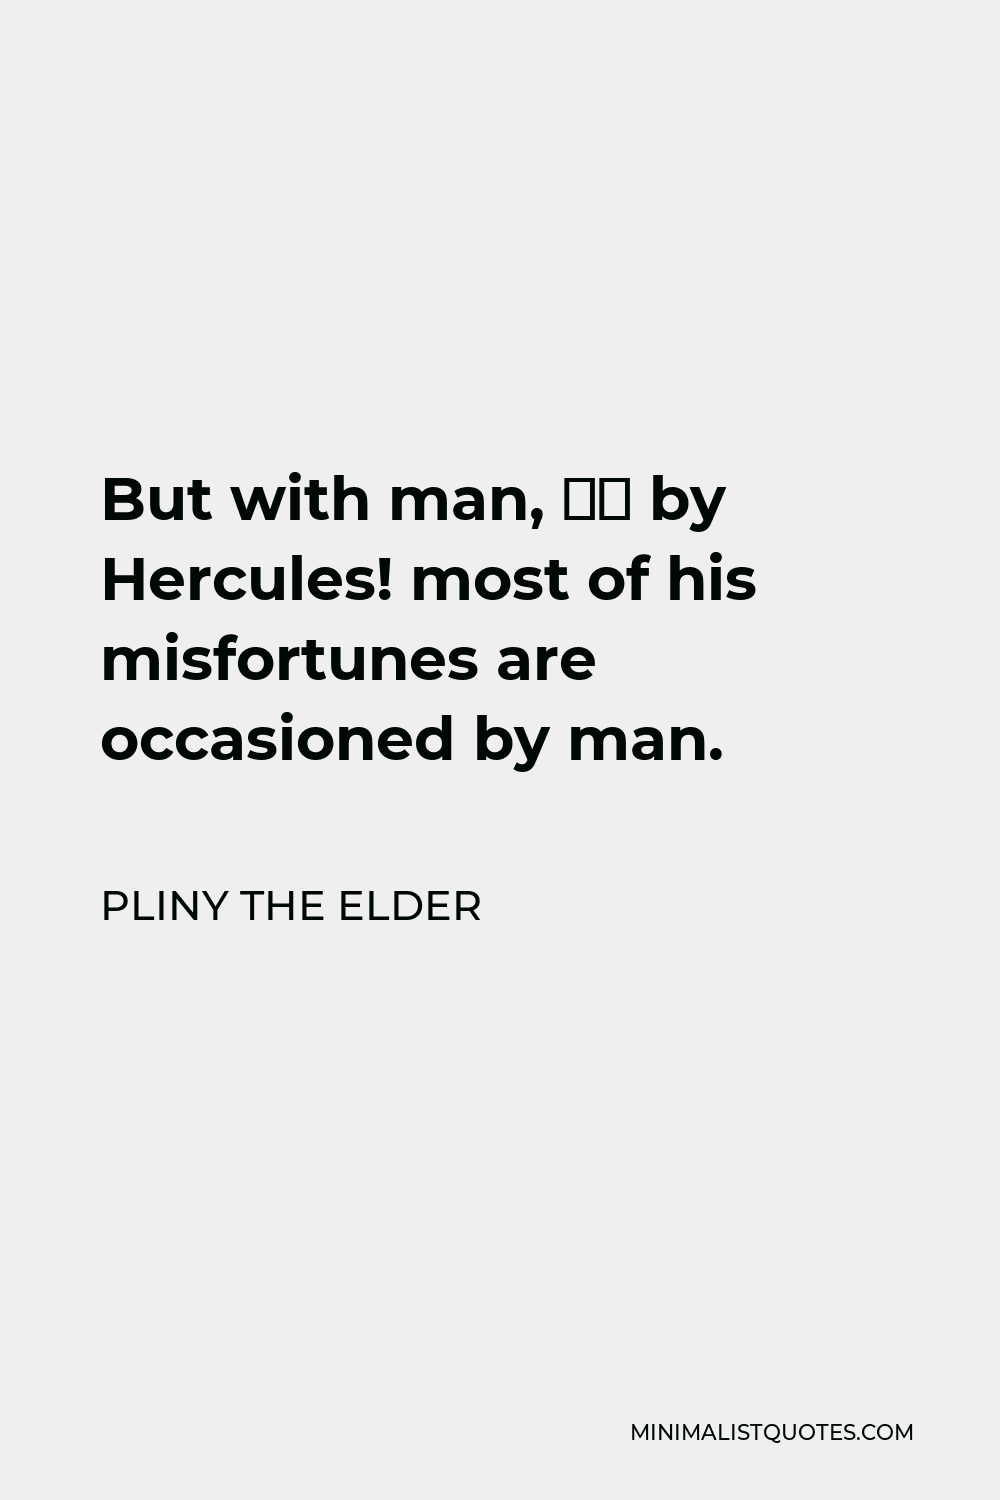 Pliny the Elder Quote - But with man, — by Hercules! most of his misfortunes are occasioned by man.